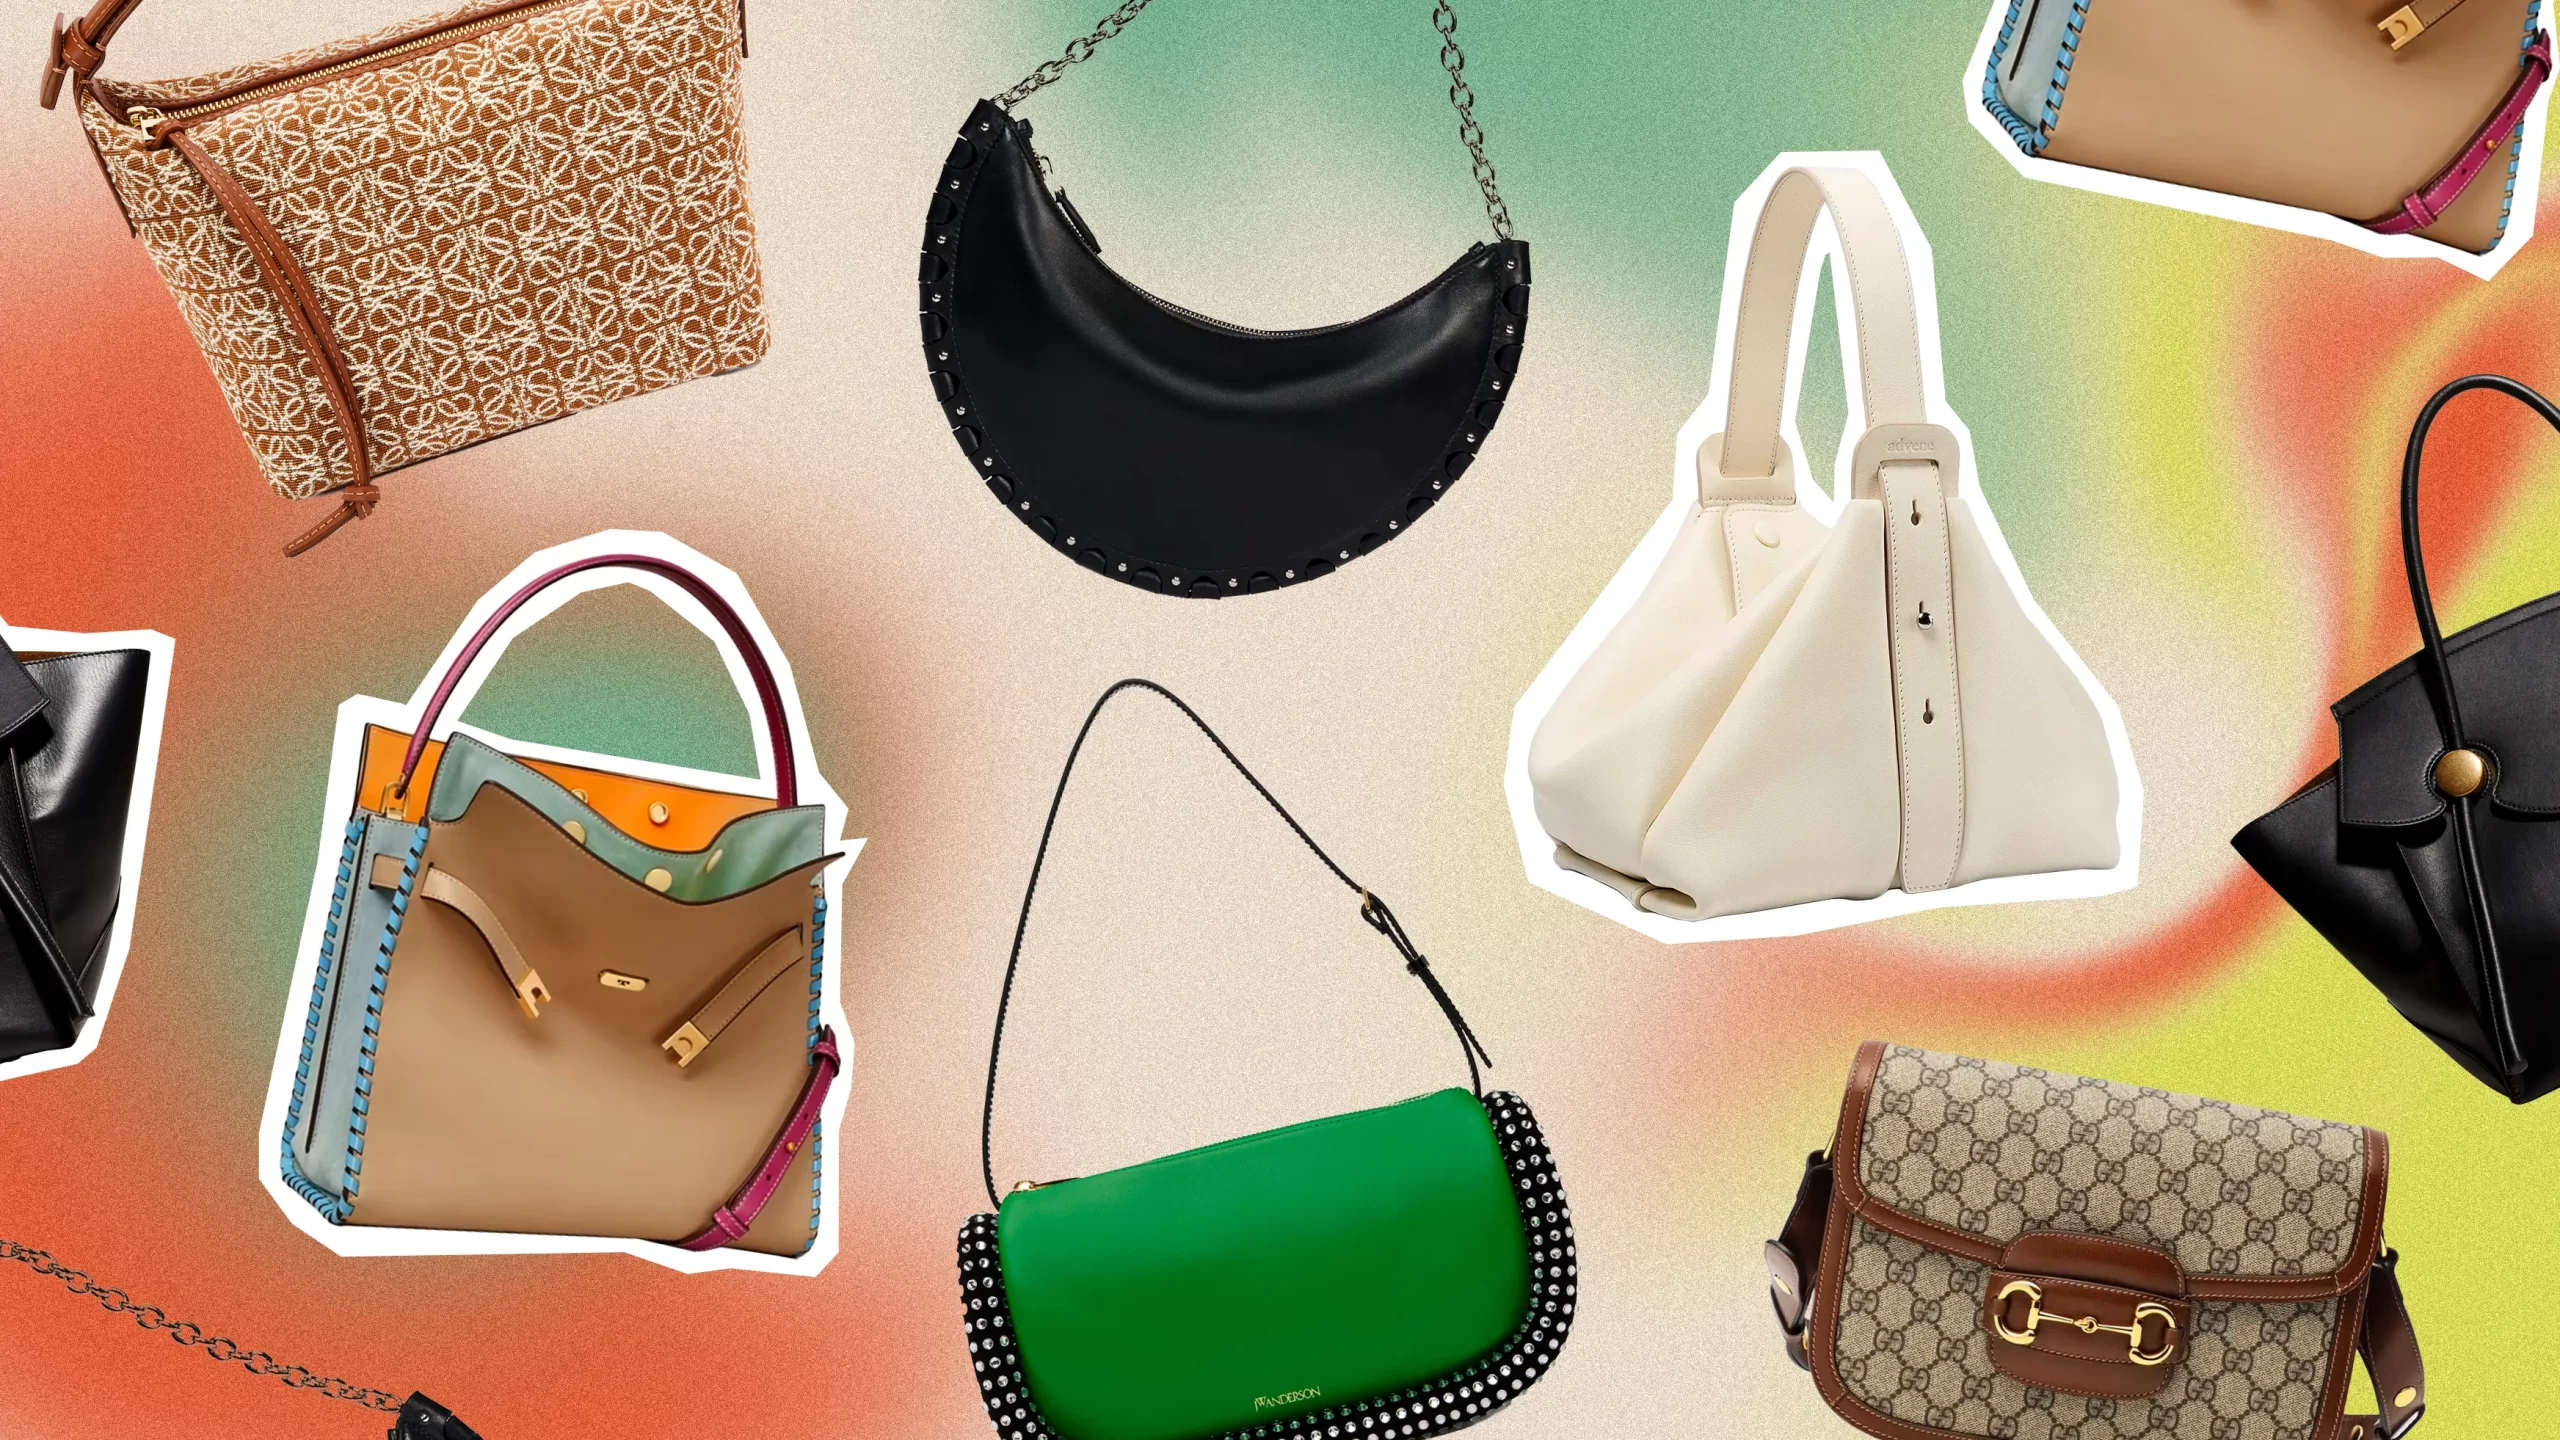 “Bag Essentials: Must-Have Styles for Every Wardrobe”